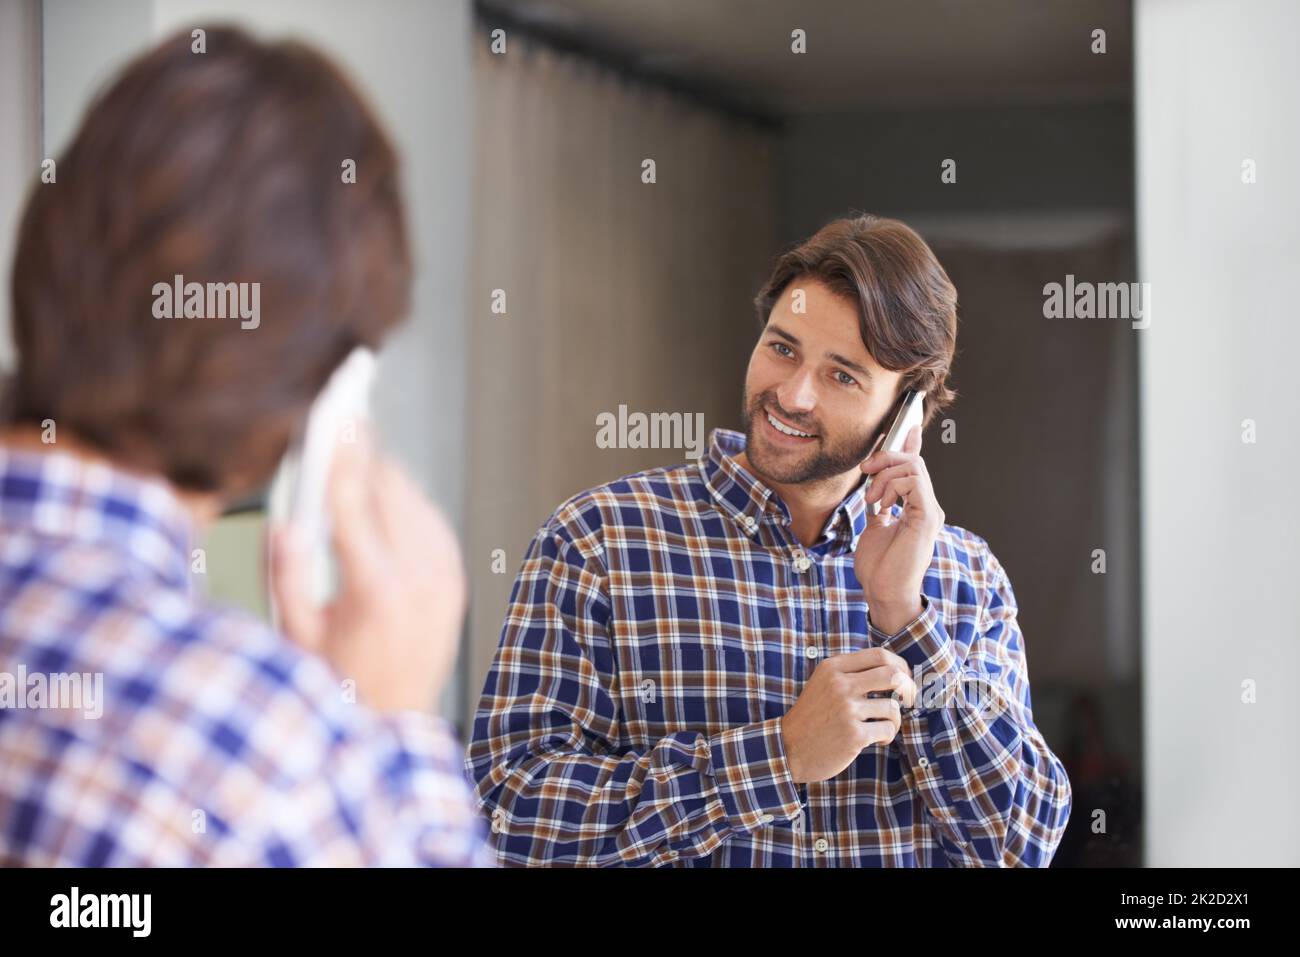 Getting his schedule ready before leaving for work. Shot of a handsome man talking on the phone while getting ready for work. Stock Photo